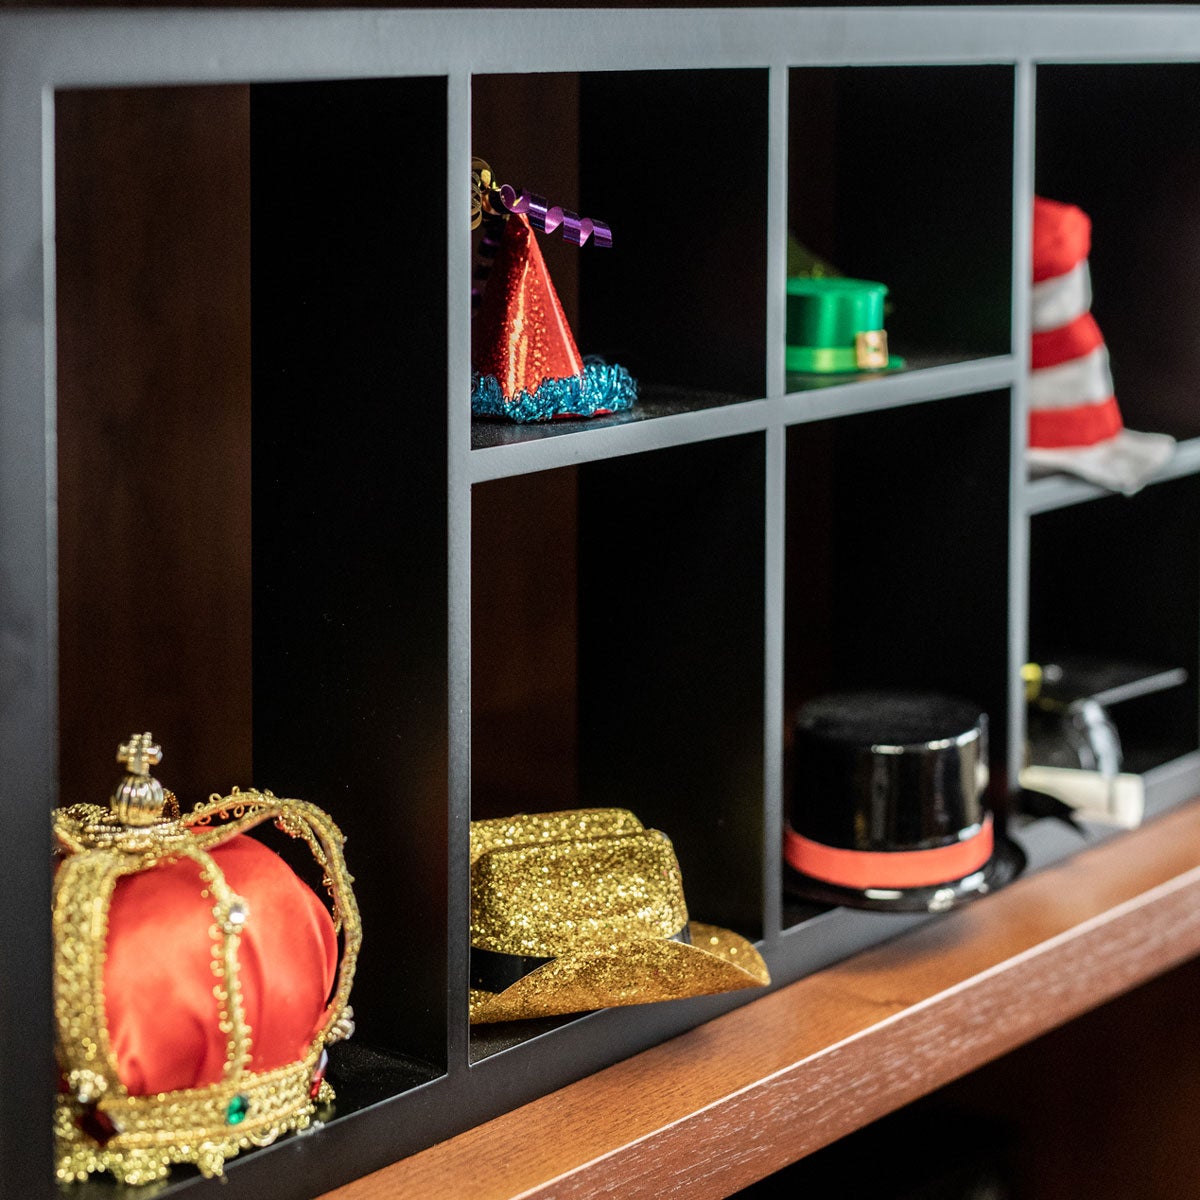 a black horizontal cube shelf with hats of different styles featuring a royal crown, cowboy hat and top hat